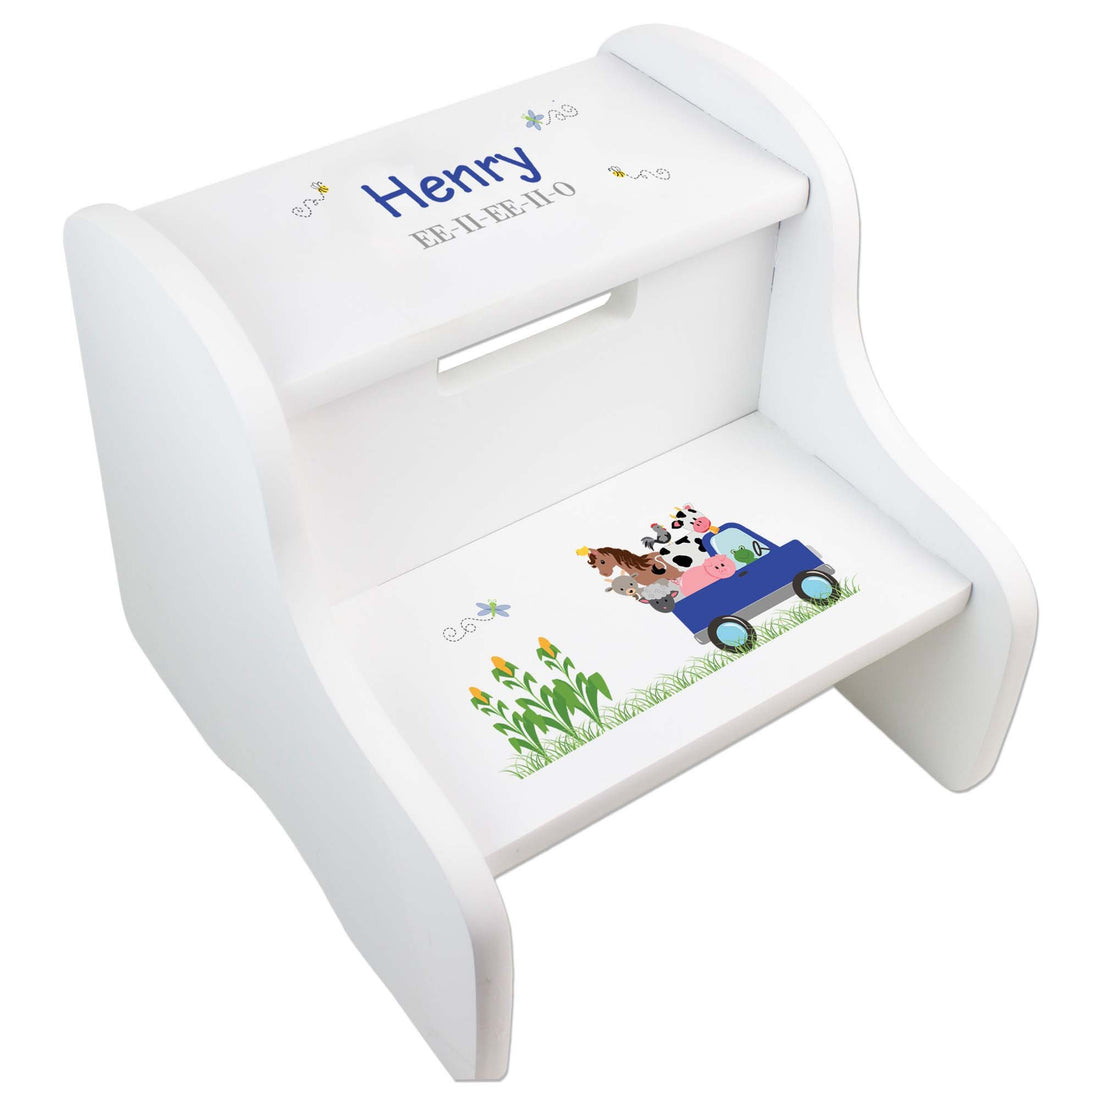 Personalized White Step Stool With Surf'S Up Design